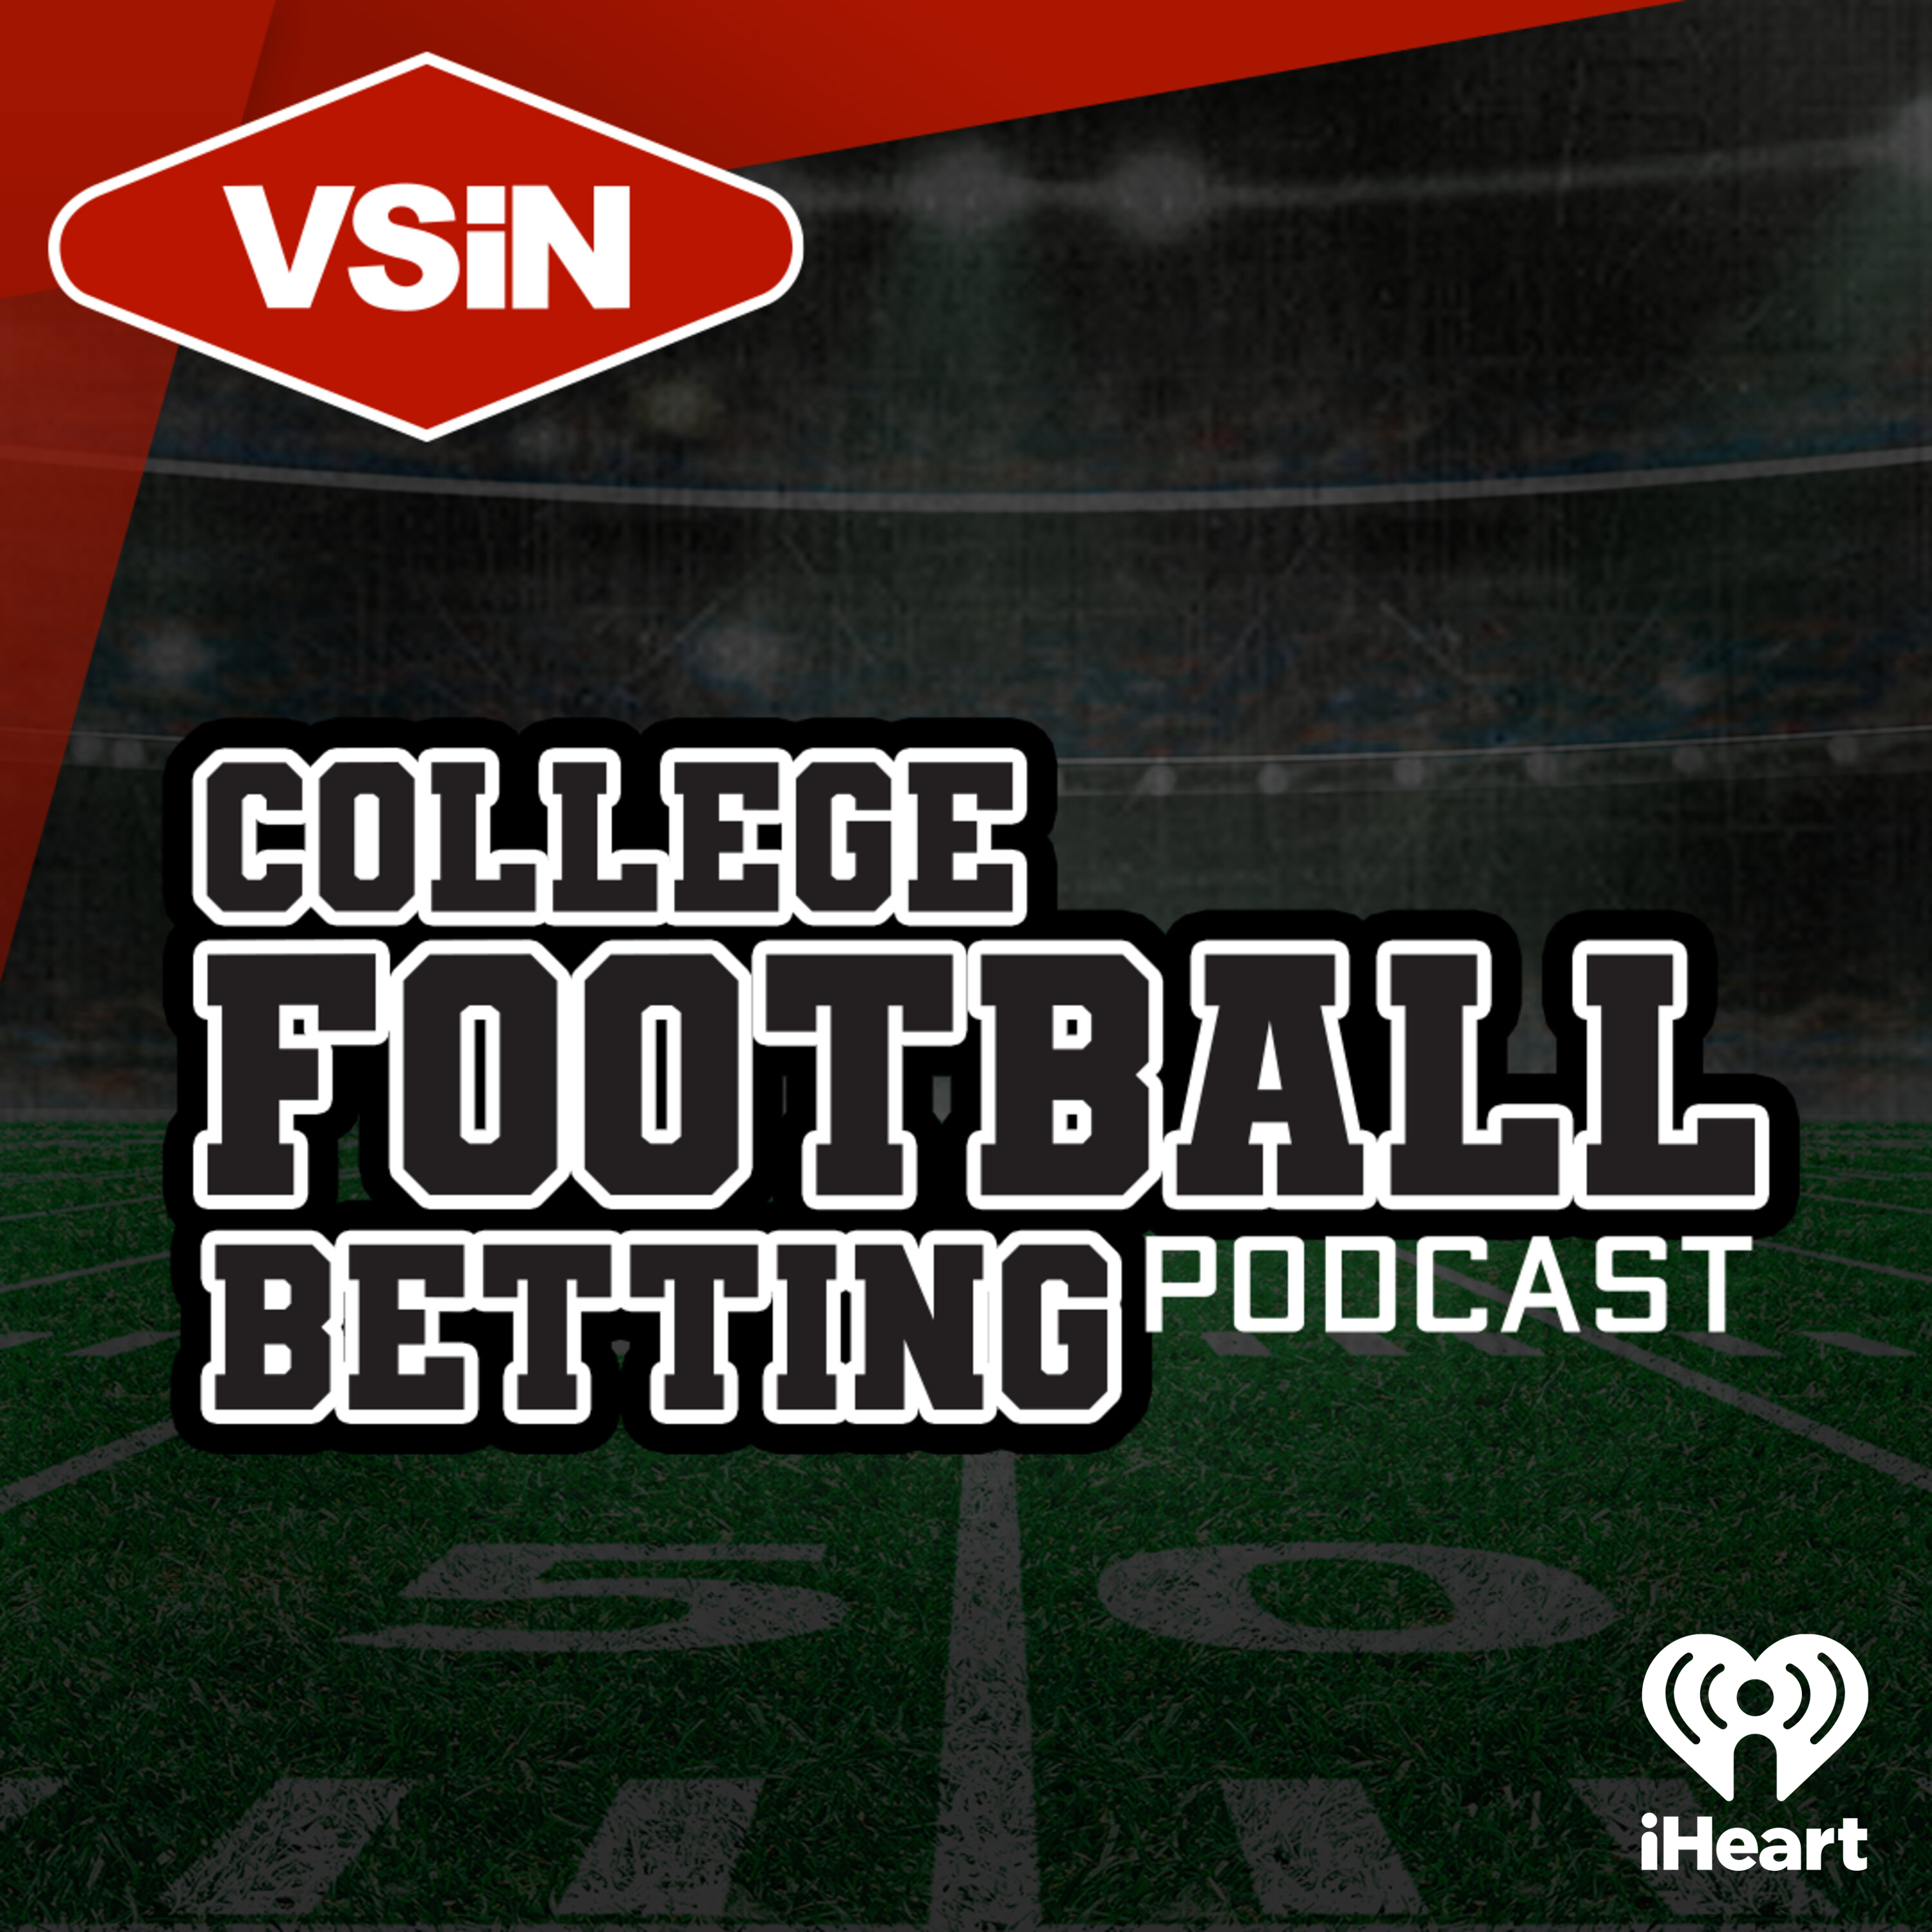 Best bets for college football Championship Weekend